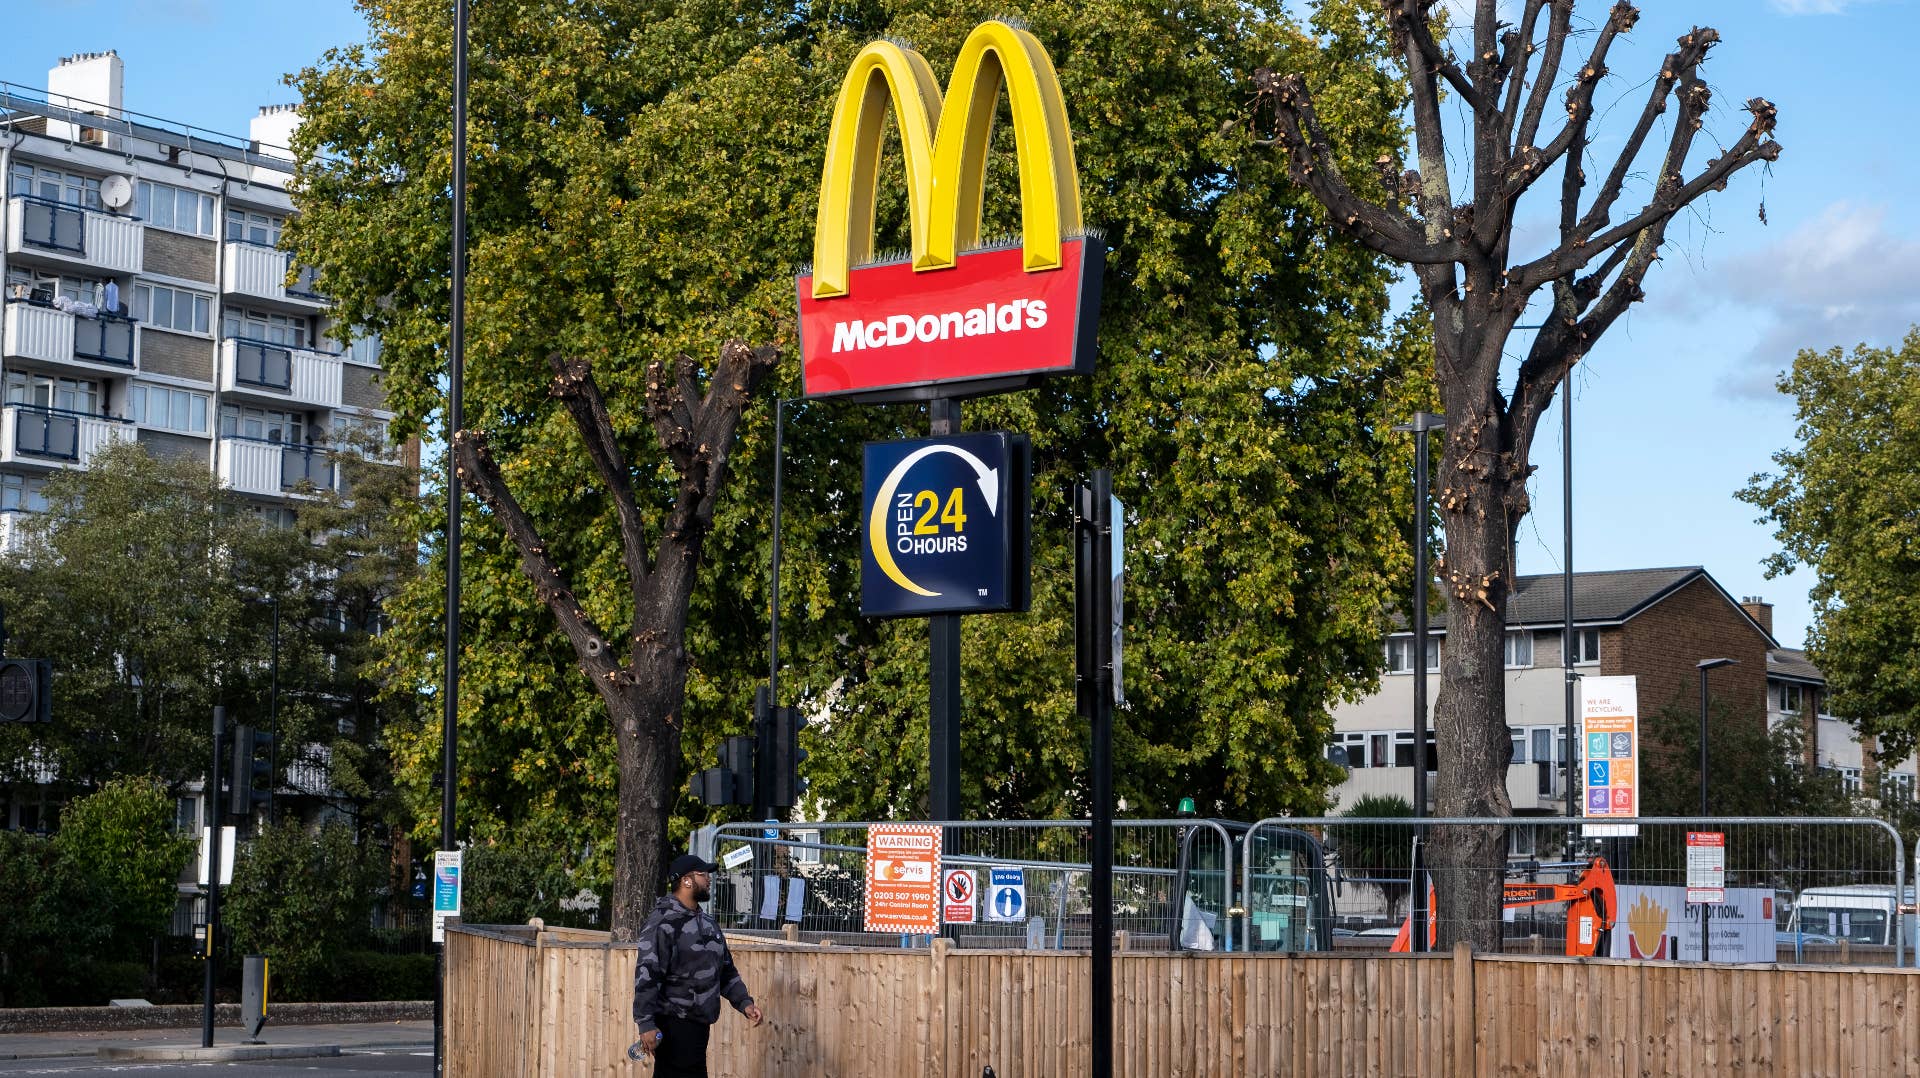 24 hour McDonalds fast food restaurant in Canning Town.